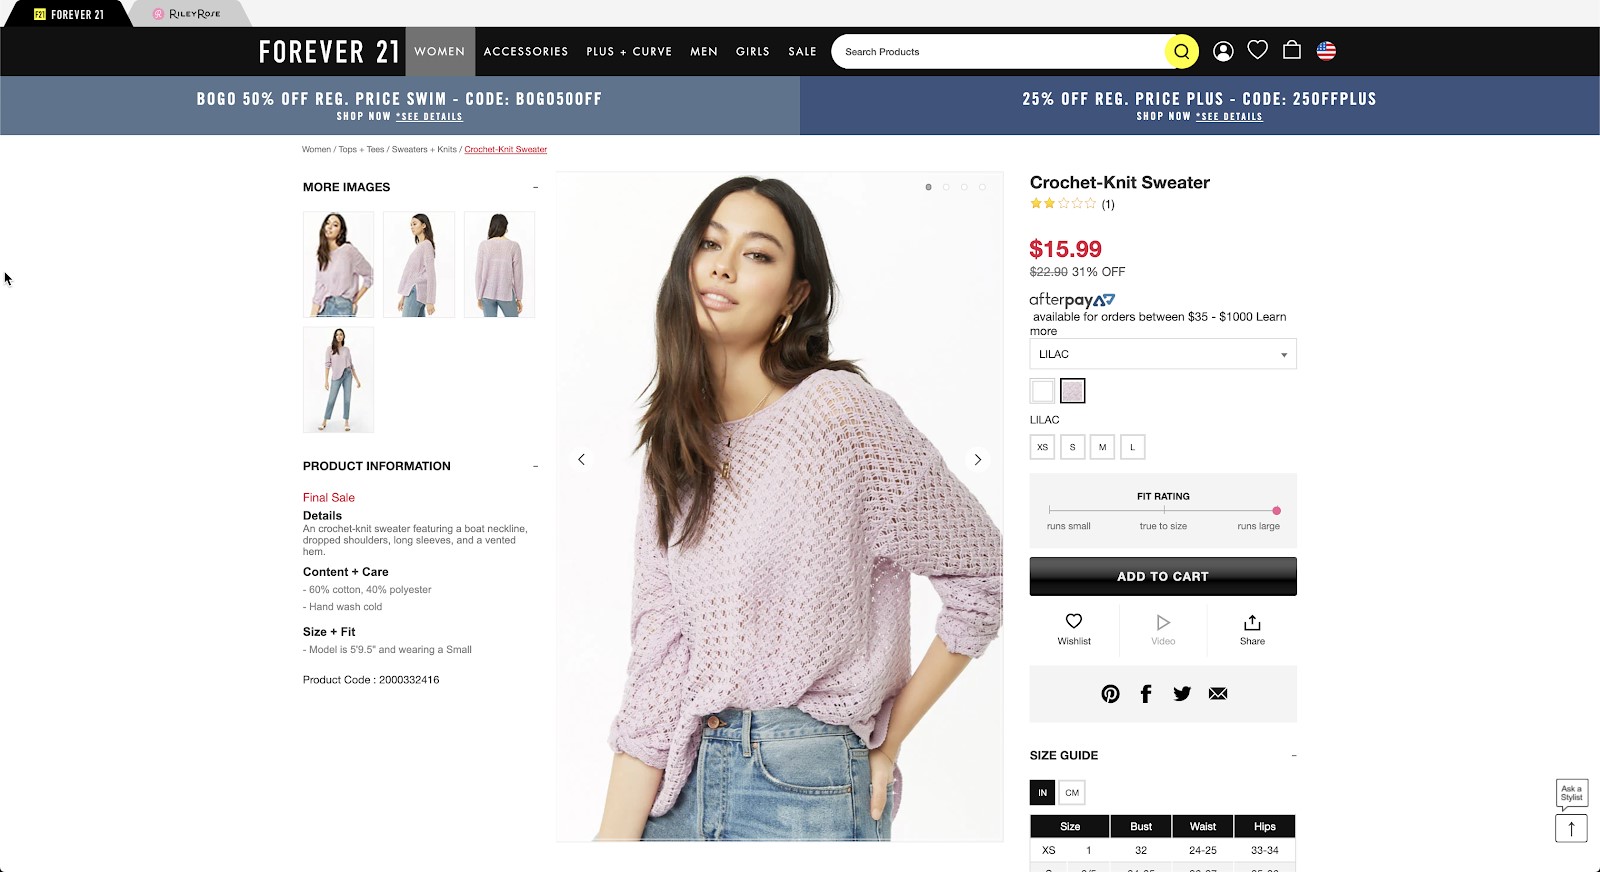 Shopping page for Forever 21's transparent crochet knit sweater in light pink